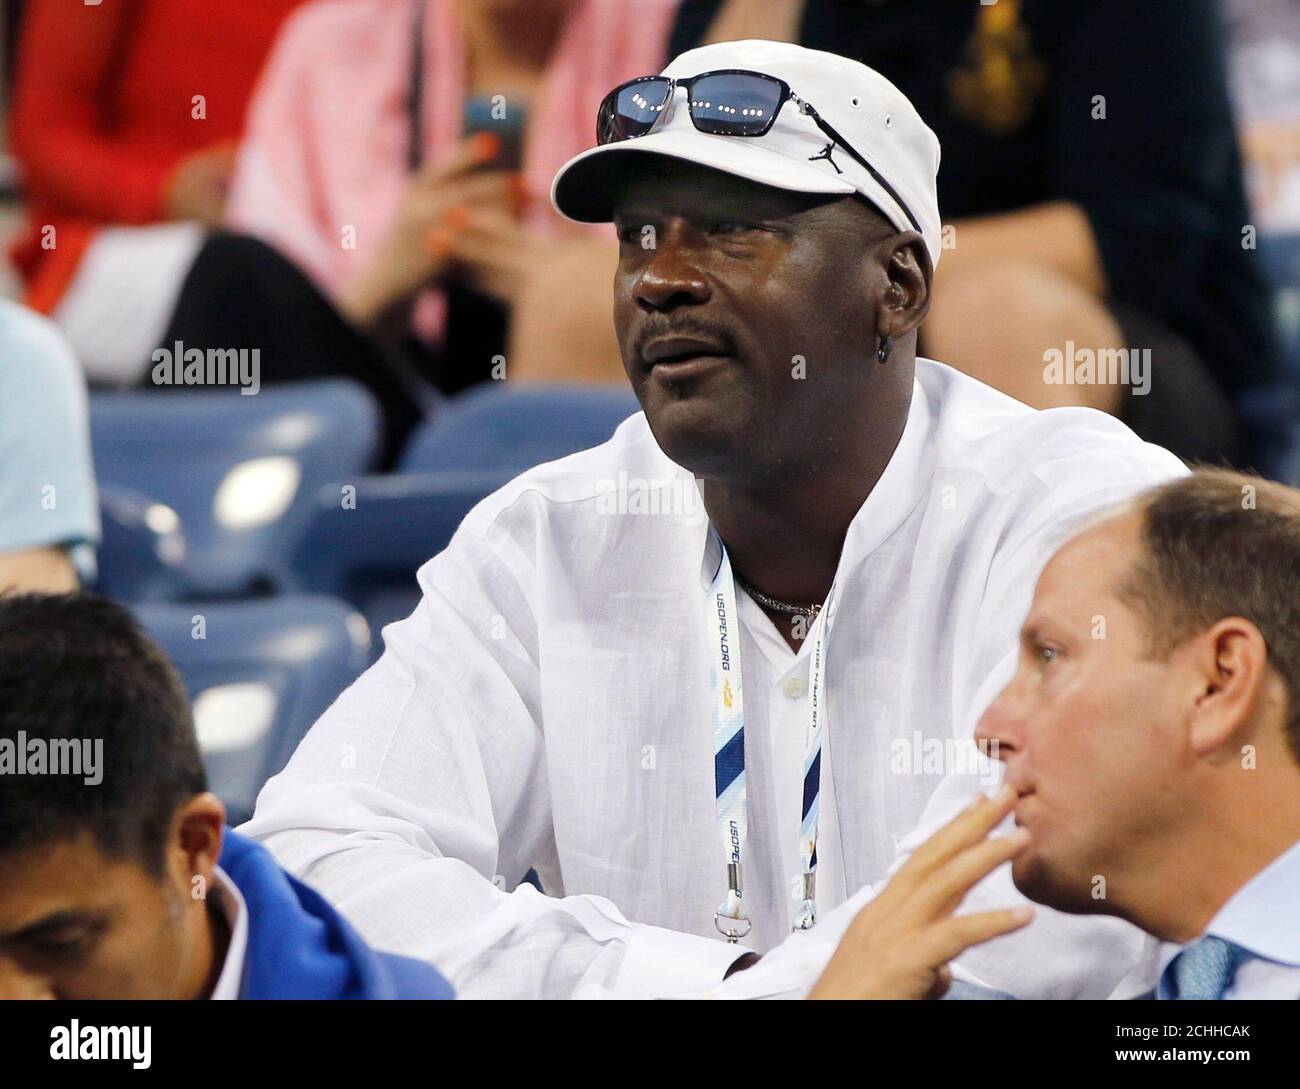 Former basketball great Michael Jordan watches Roger Federer of Switzerland  play Marinko Matosevic of Australia at the U.S. Open tennis tournament in  New York August 26, 2014. REUTERS/Shannon Stapleton (UNITED STATES -